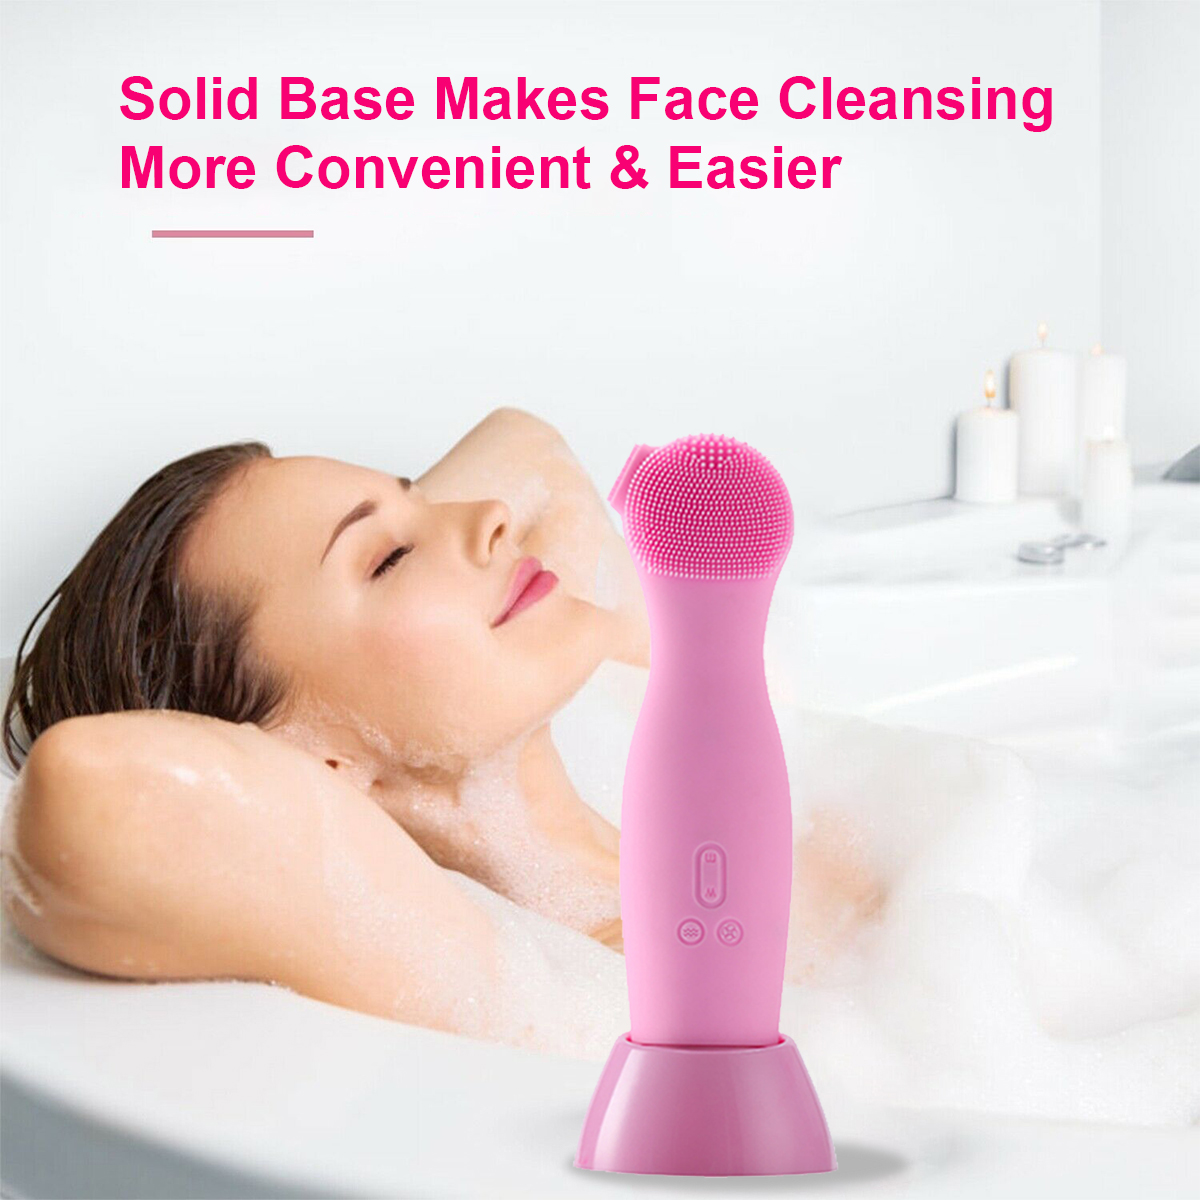 Find Bakeey 4 in 1 Electric Facial Wash Brush Waterproof Silicone Facial Cleanser Cleaner for Sale on Gipsybee.com with cryptocurrencies